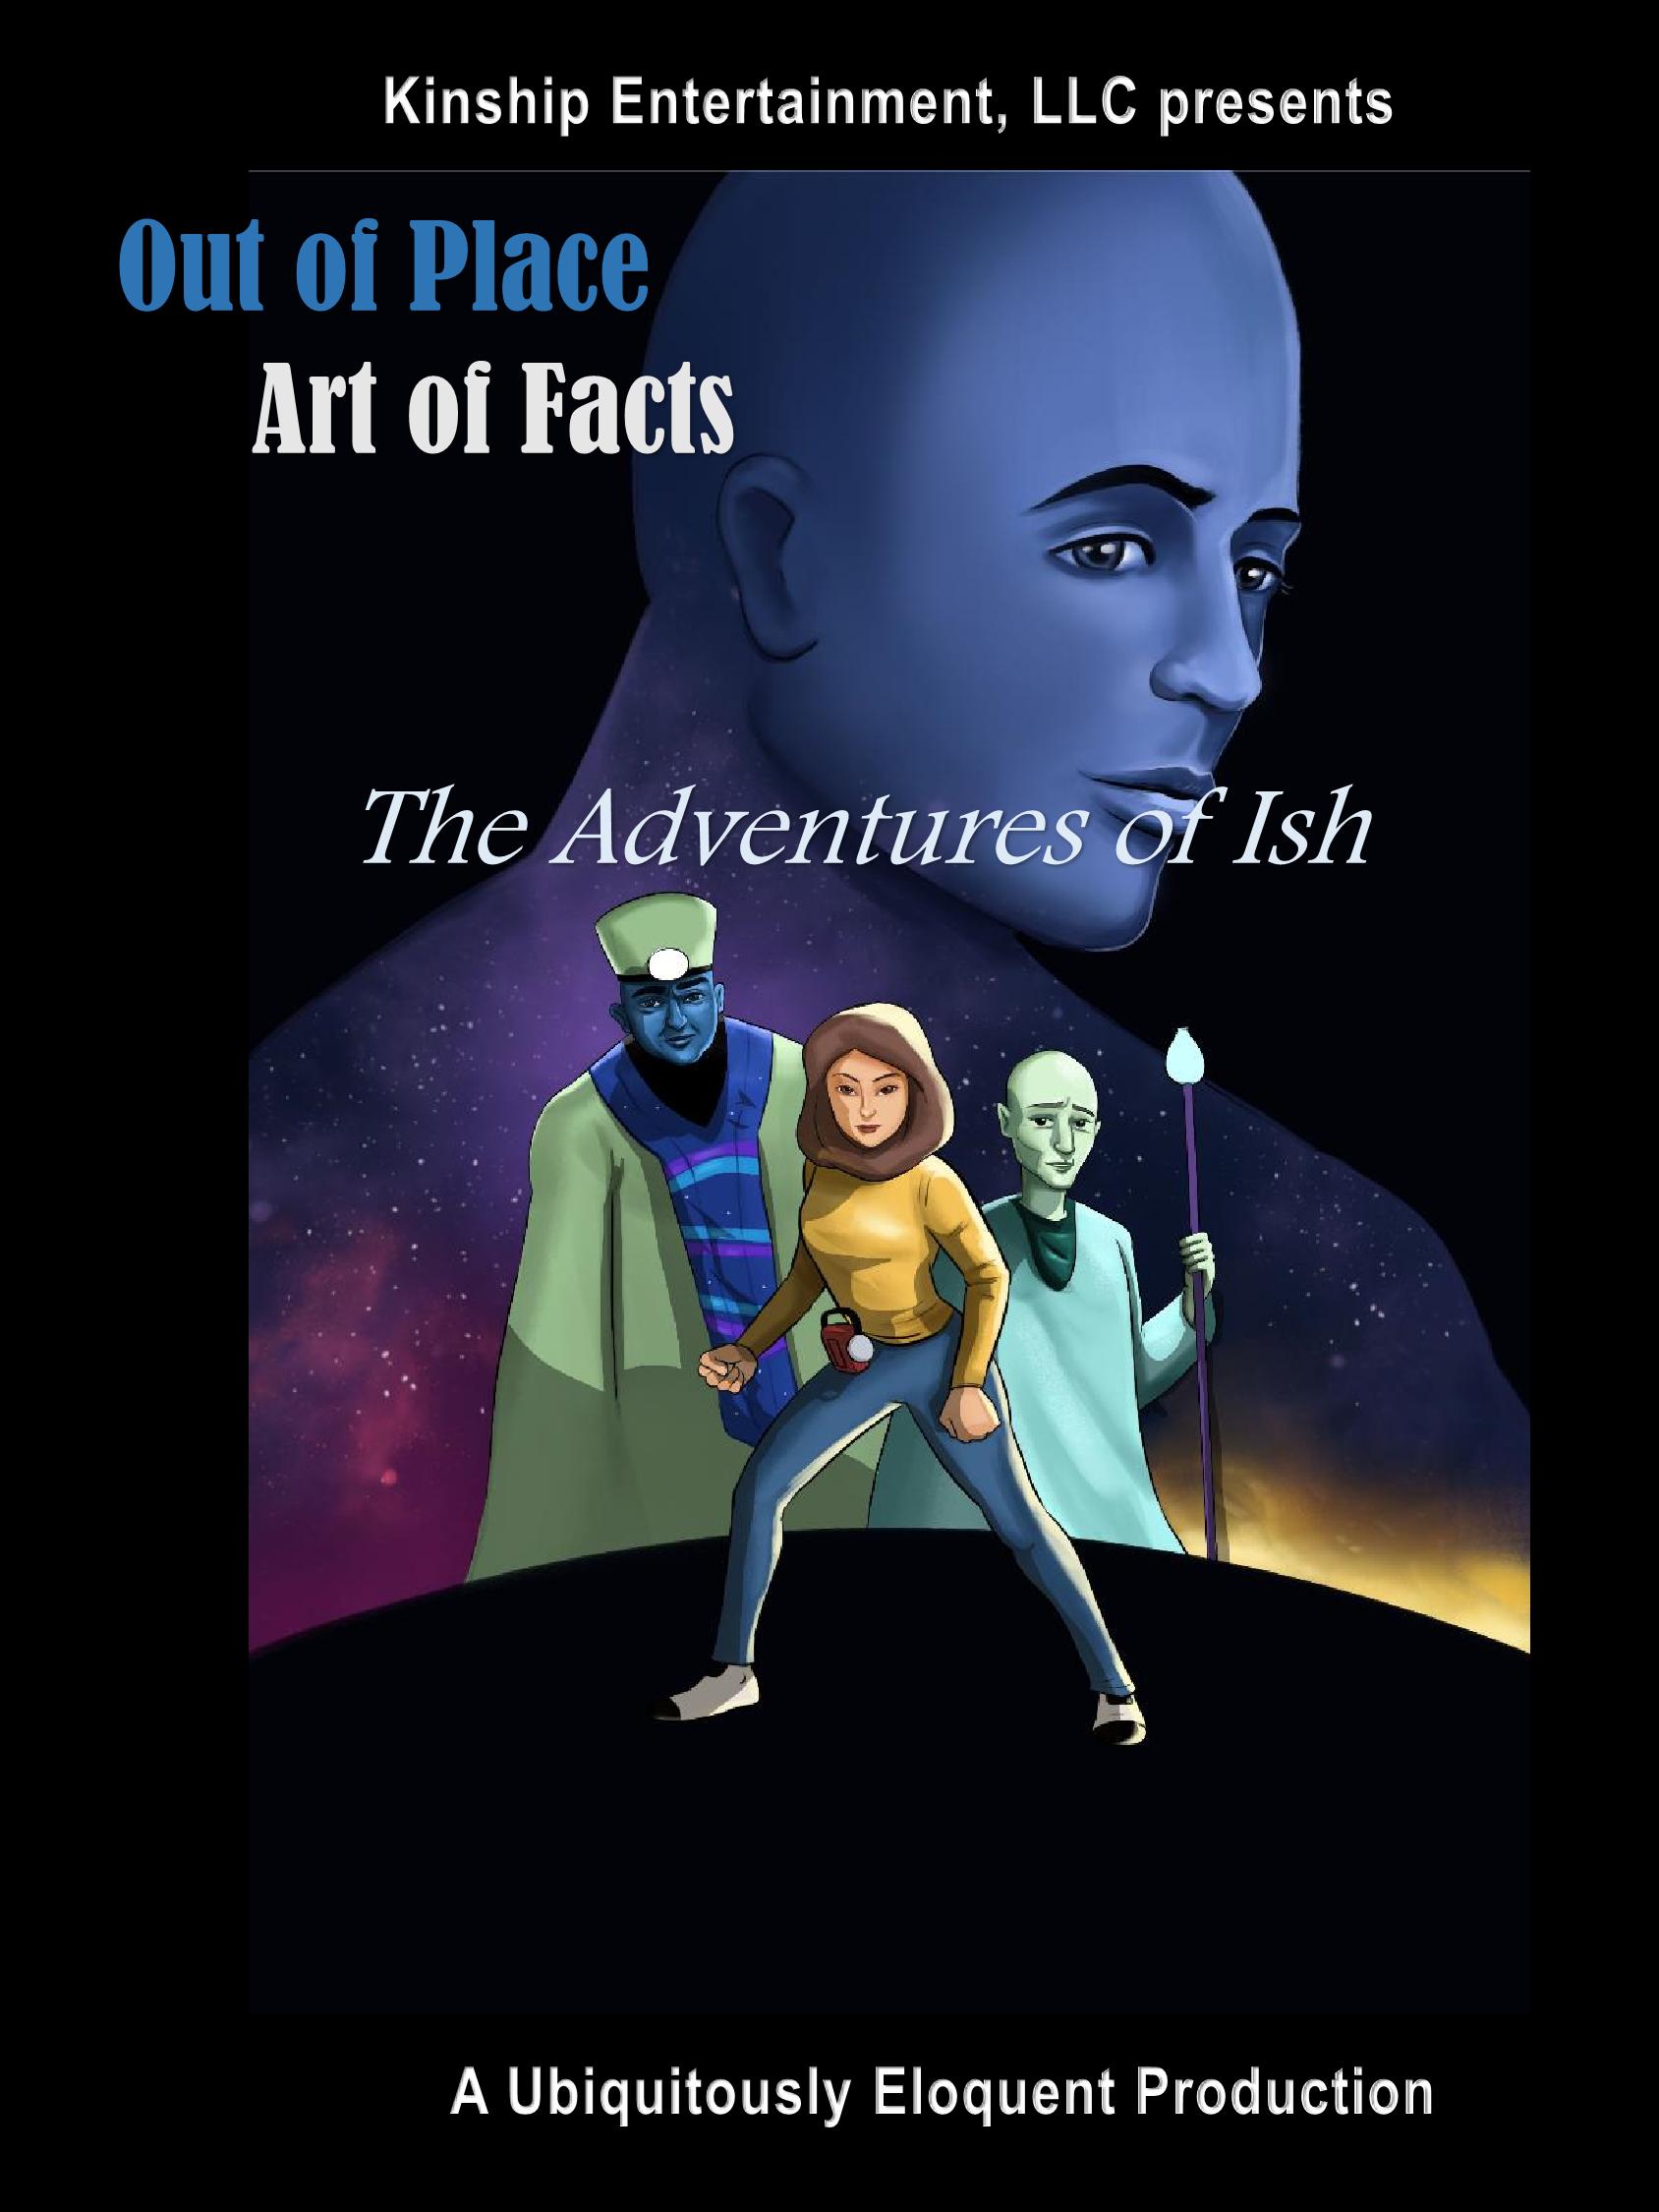 Out of Place Art of Facts - The Adventures of Ish